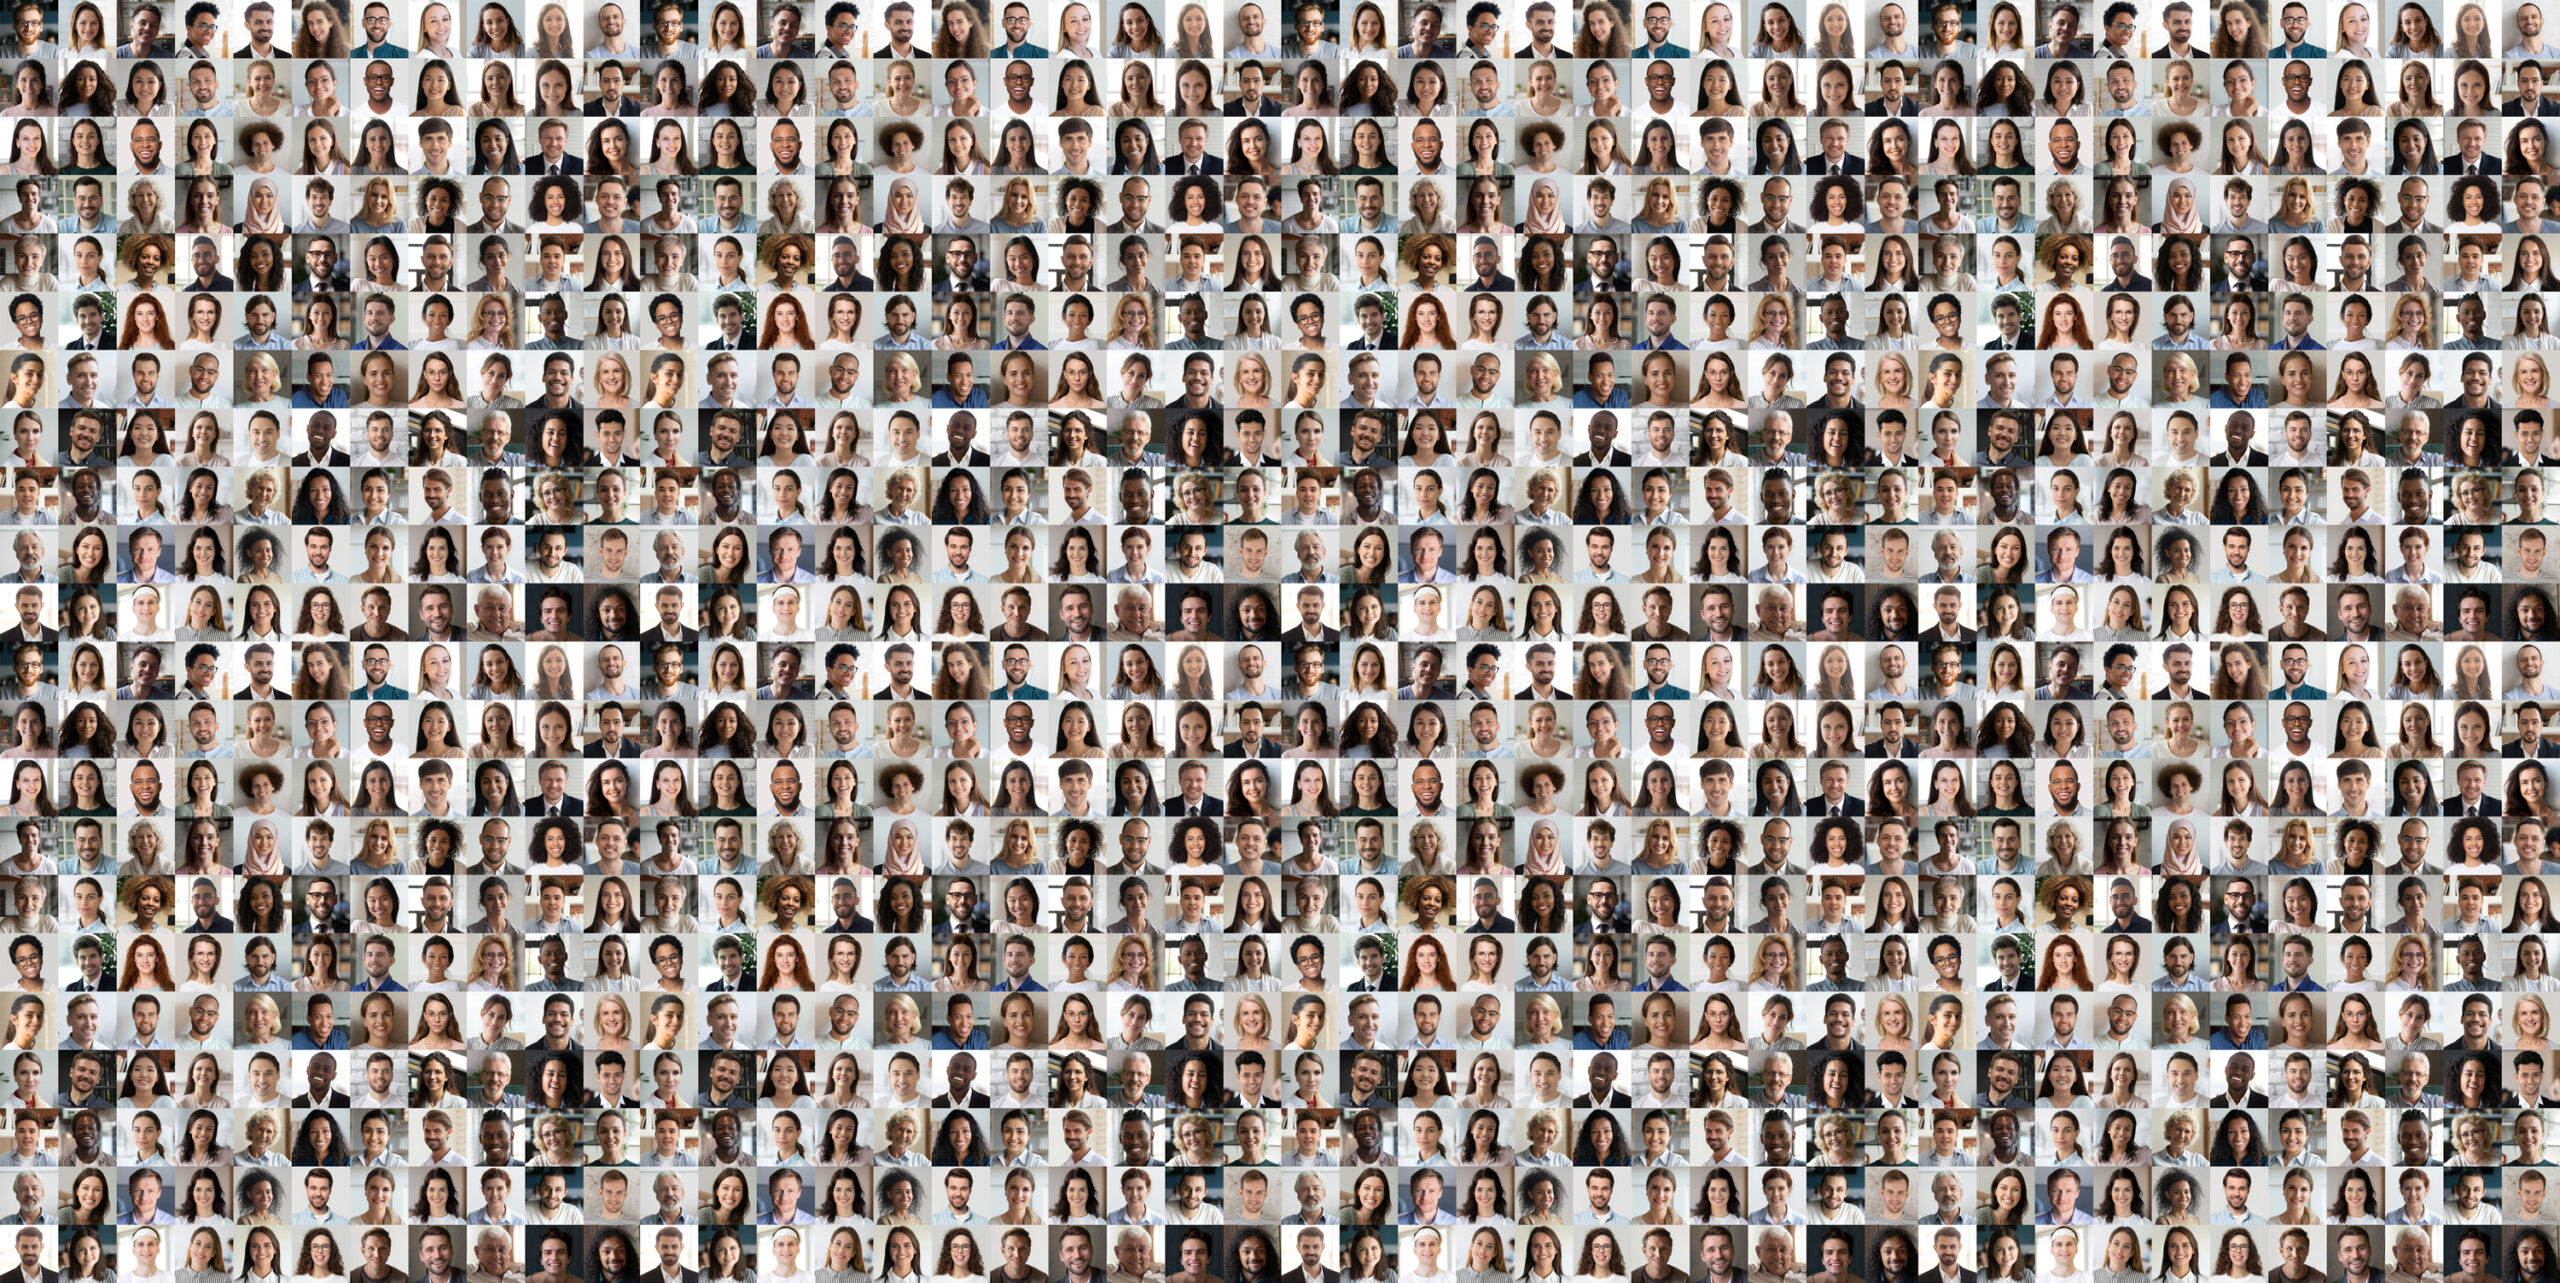 Hundreds,Of,Multiracial,People,Crowd,Portraits,Headshots,Collection,,Collage,Mosaic.